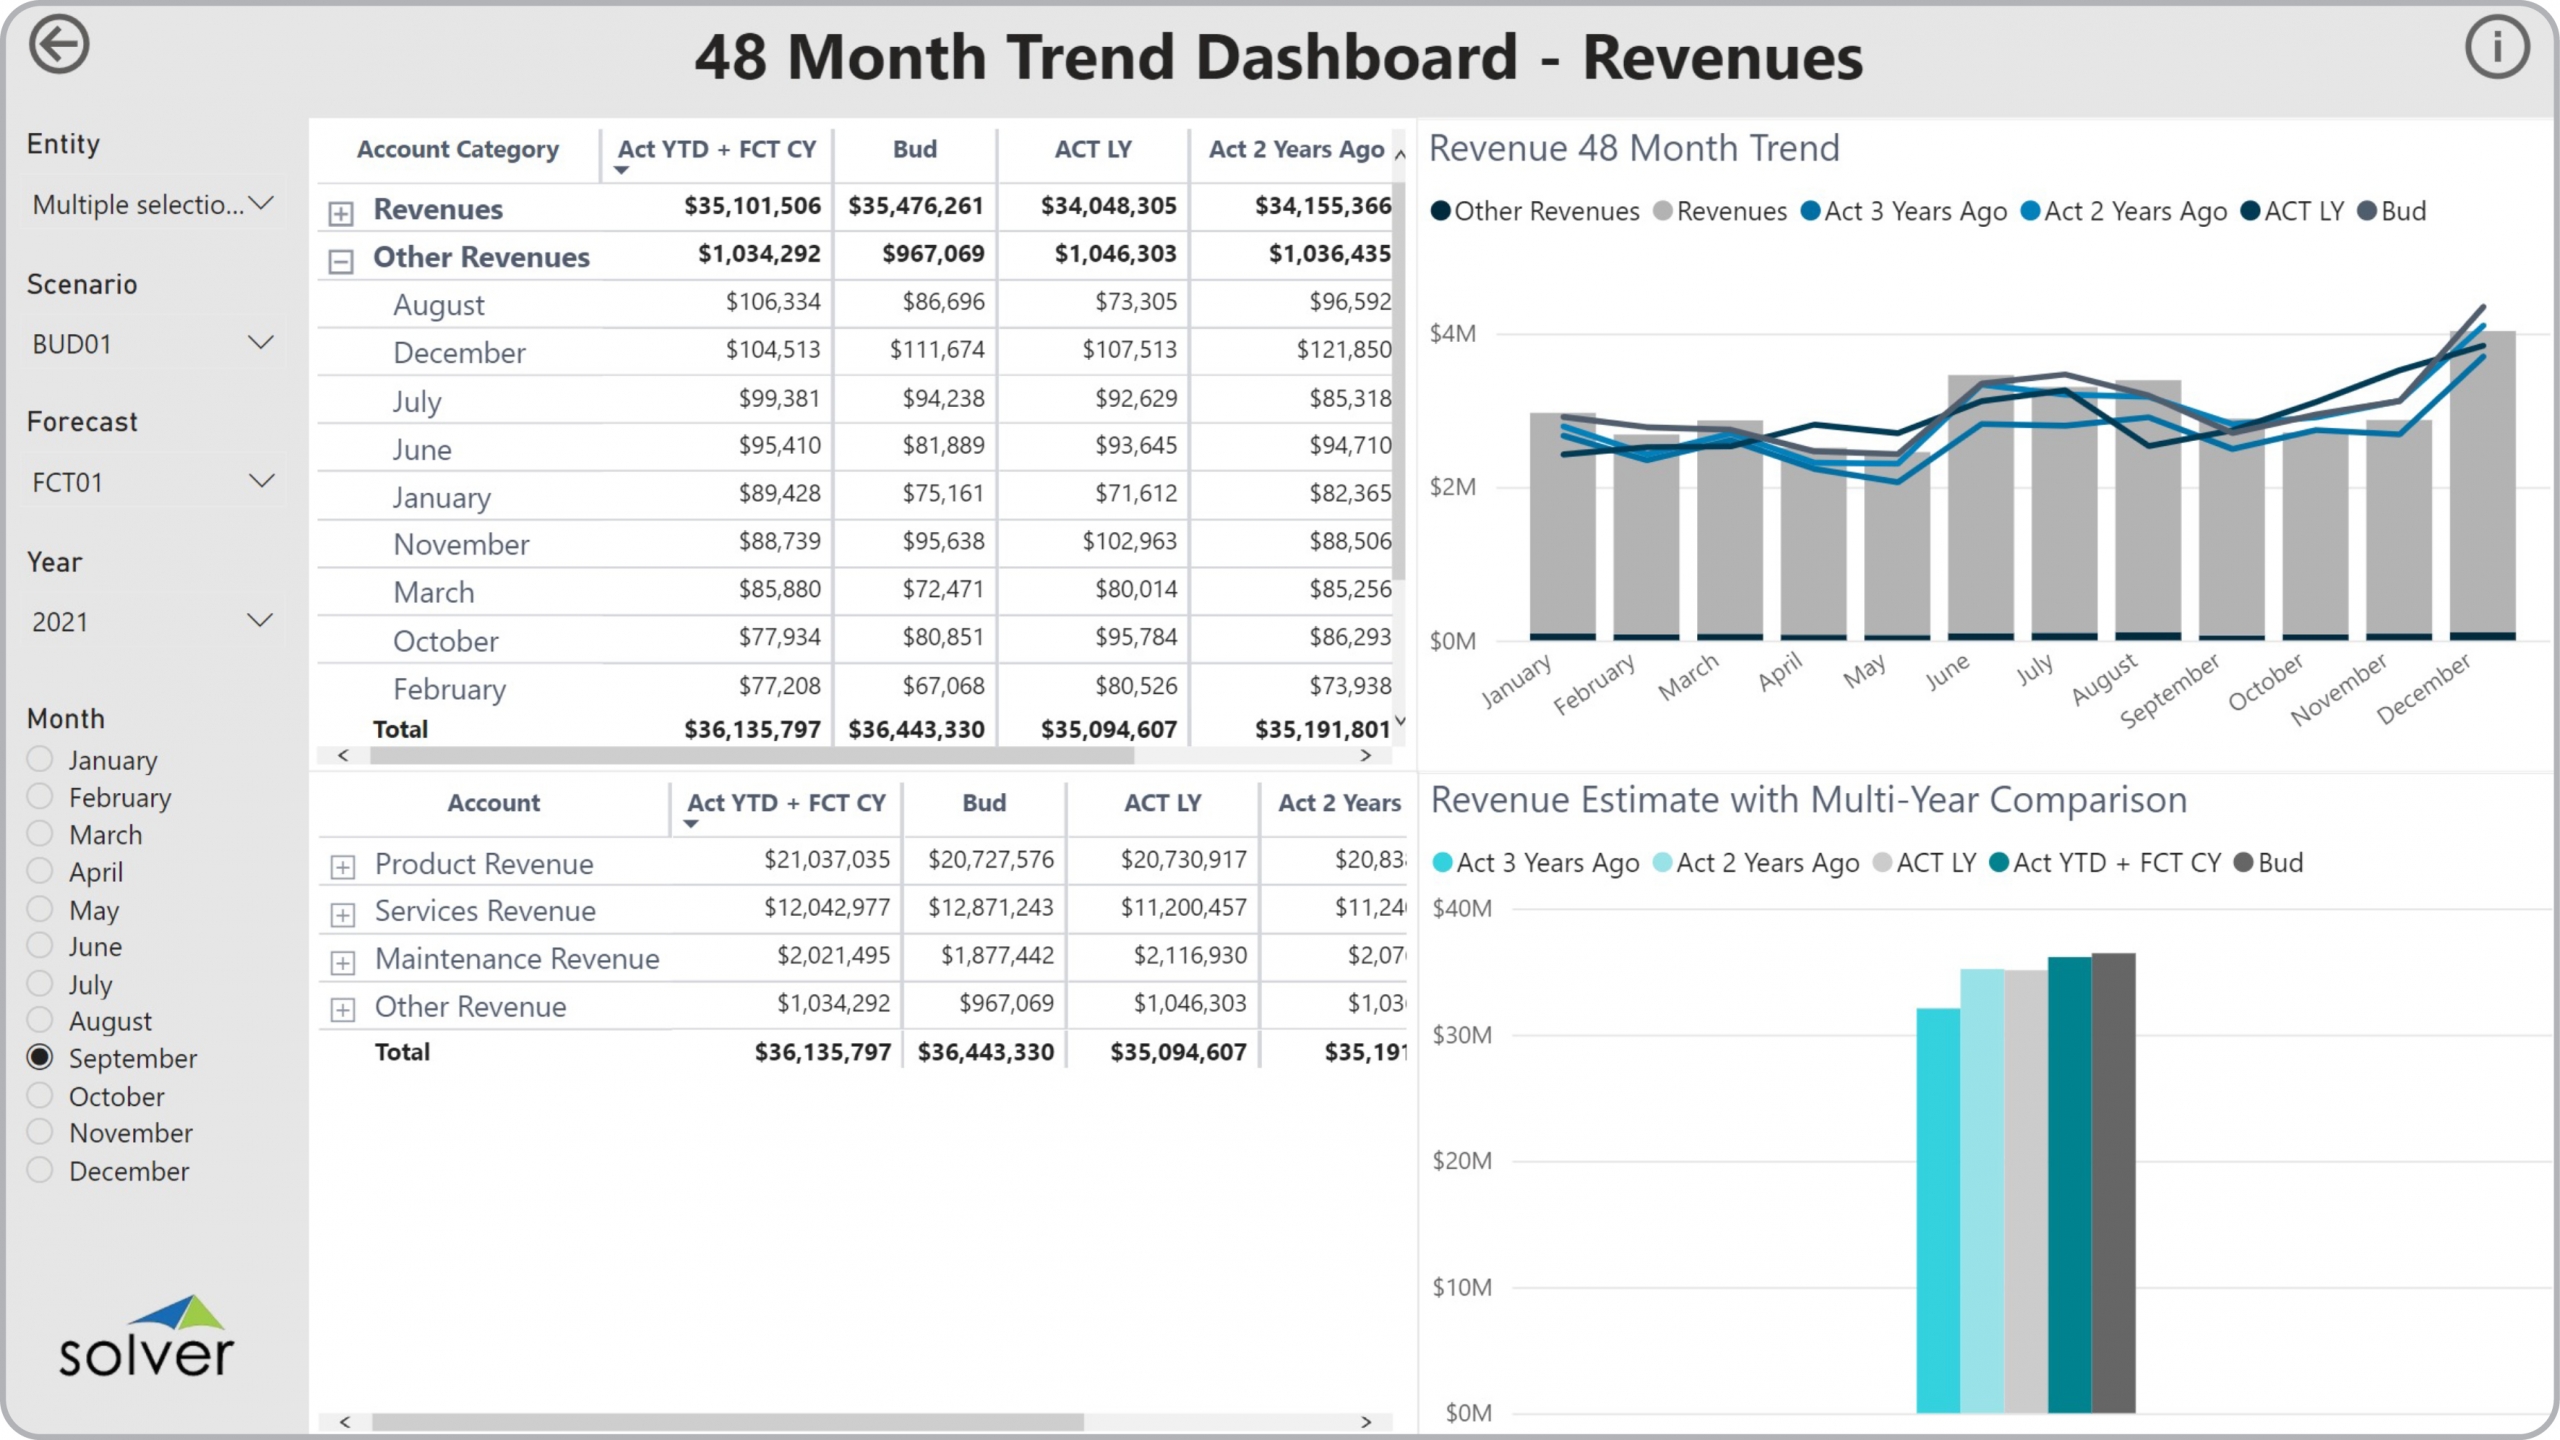 Example of a 48 Month Revenue Trend Dashboard to Streamline the Monthly Reporting Process